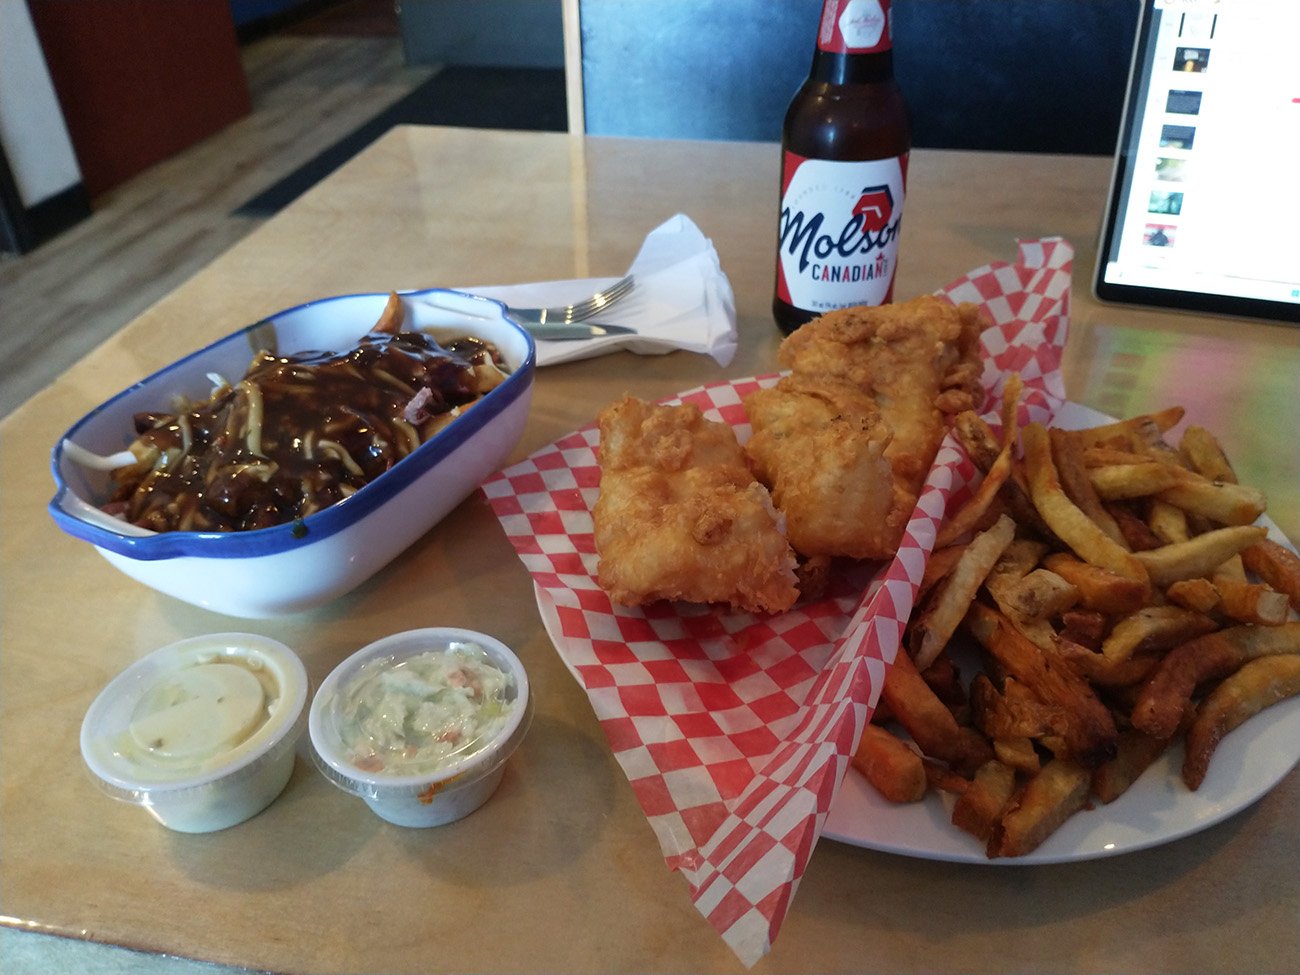 Got myself a greasy meal of fish and chips ( was very good ) and a poutine with salted beef ( an island ingredient ) that also was delicious. #deserve